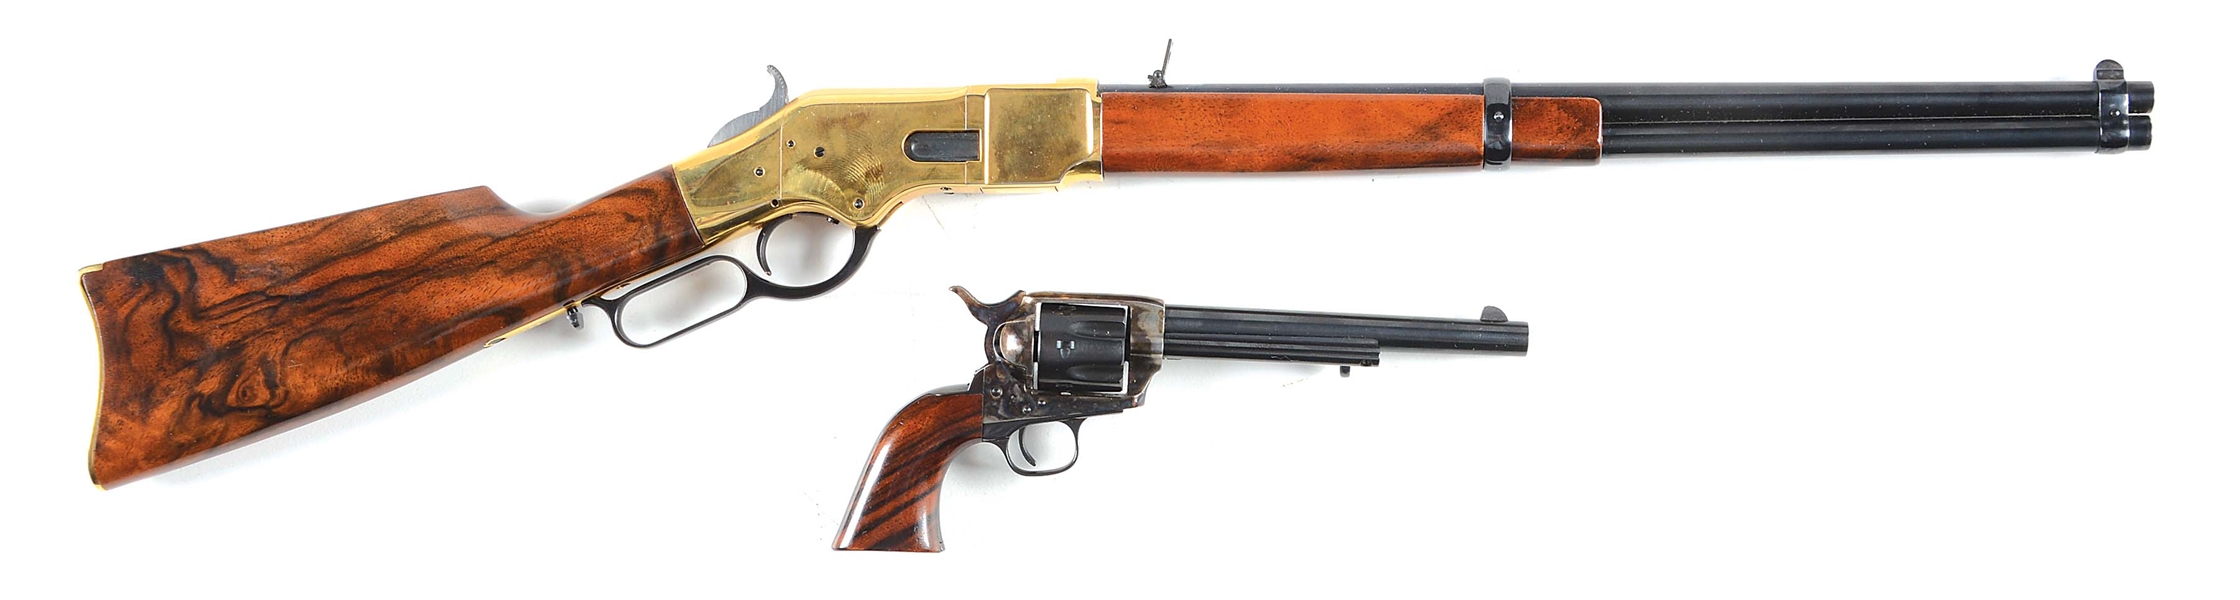 CASED PAIR OF MINIATURE UBERT LEVER ACTION RIFLE AND SINGLE ACTION REVOLVER.